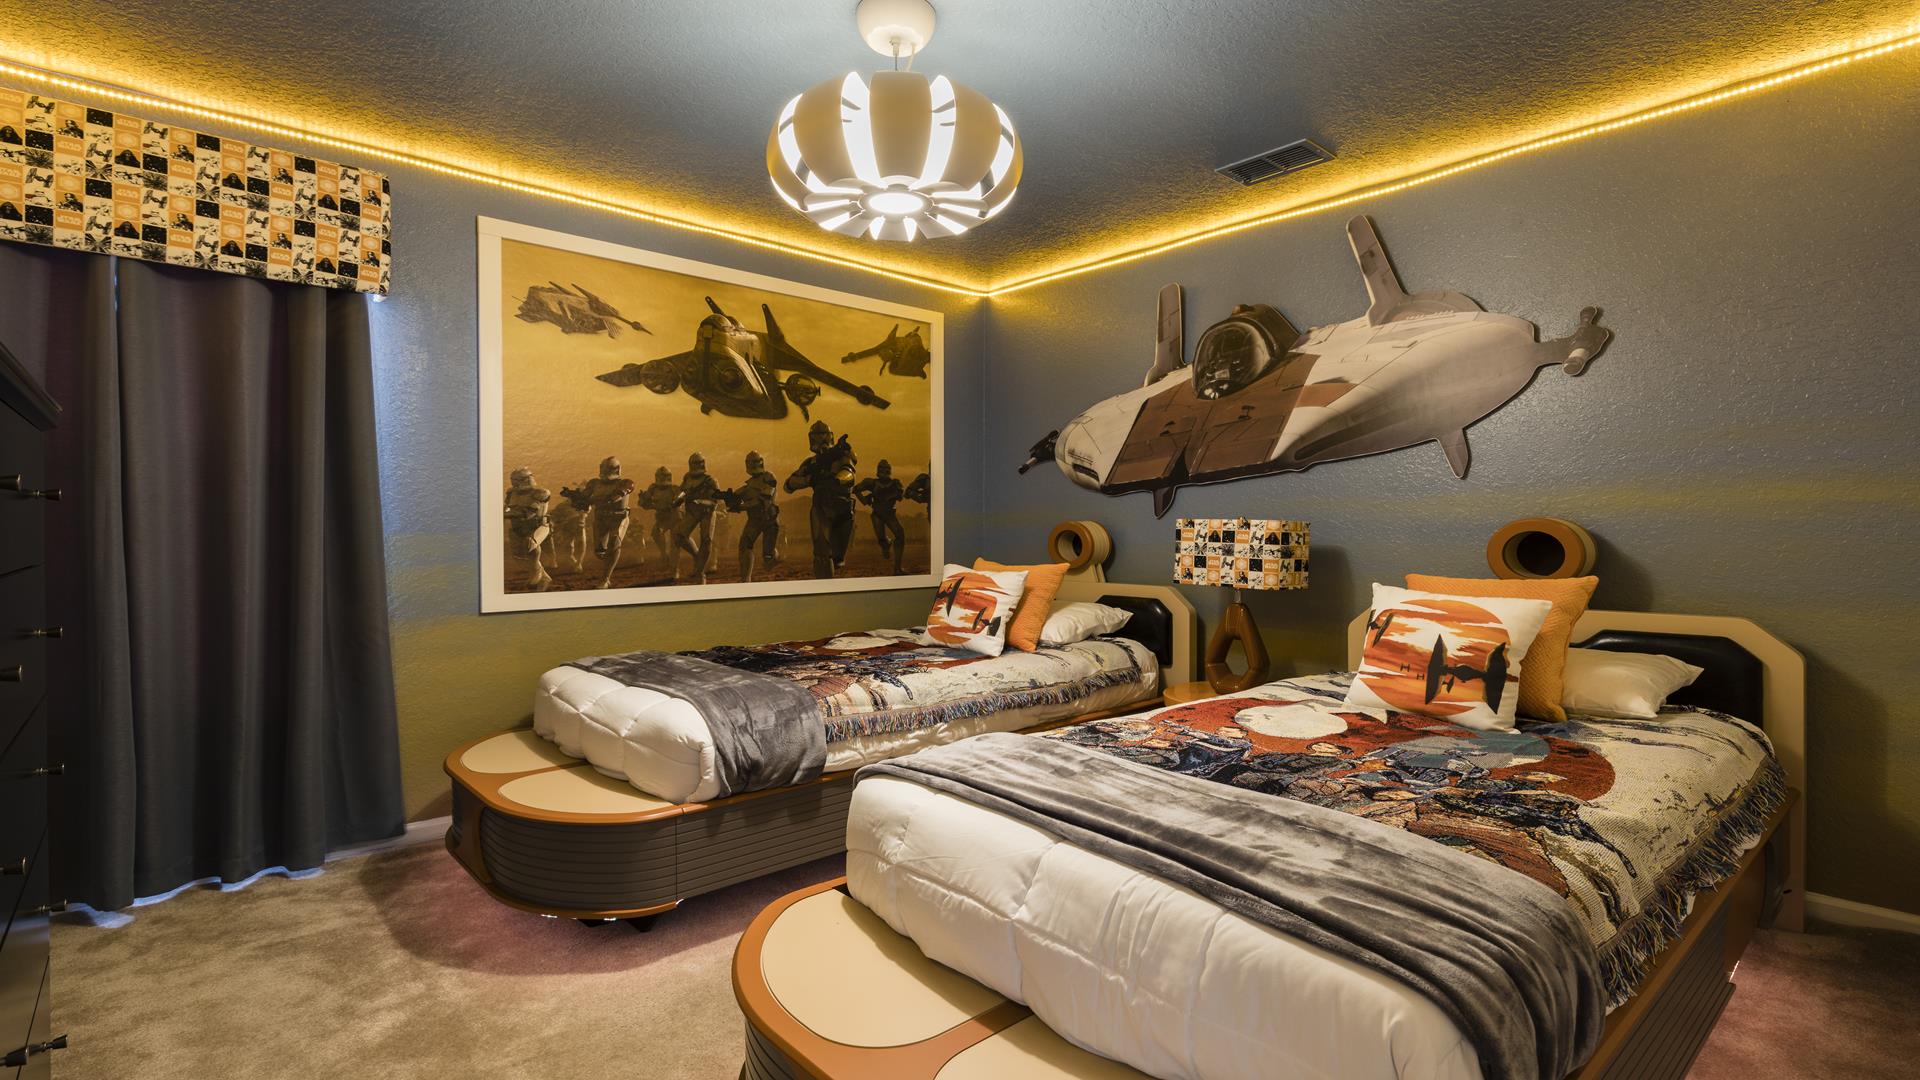 Kids will love the upstairs bedroom with a cool Star War theme